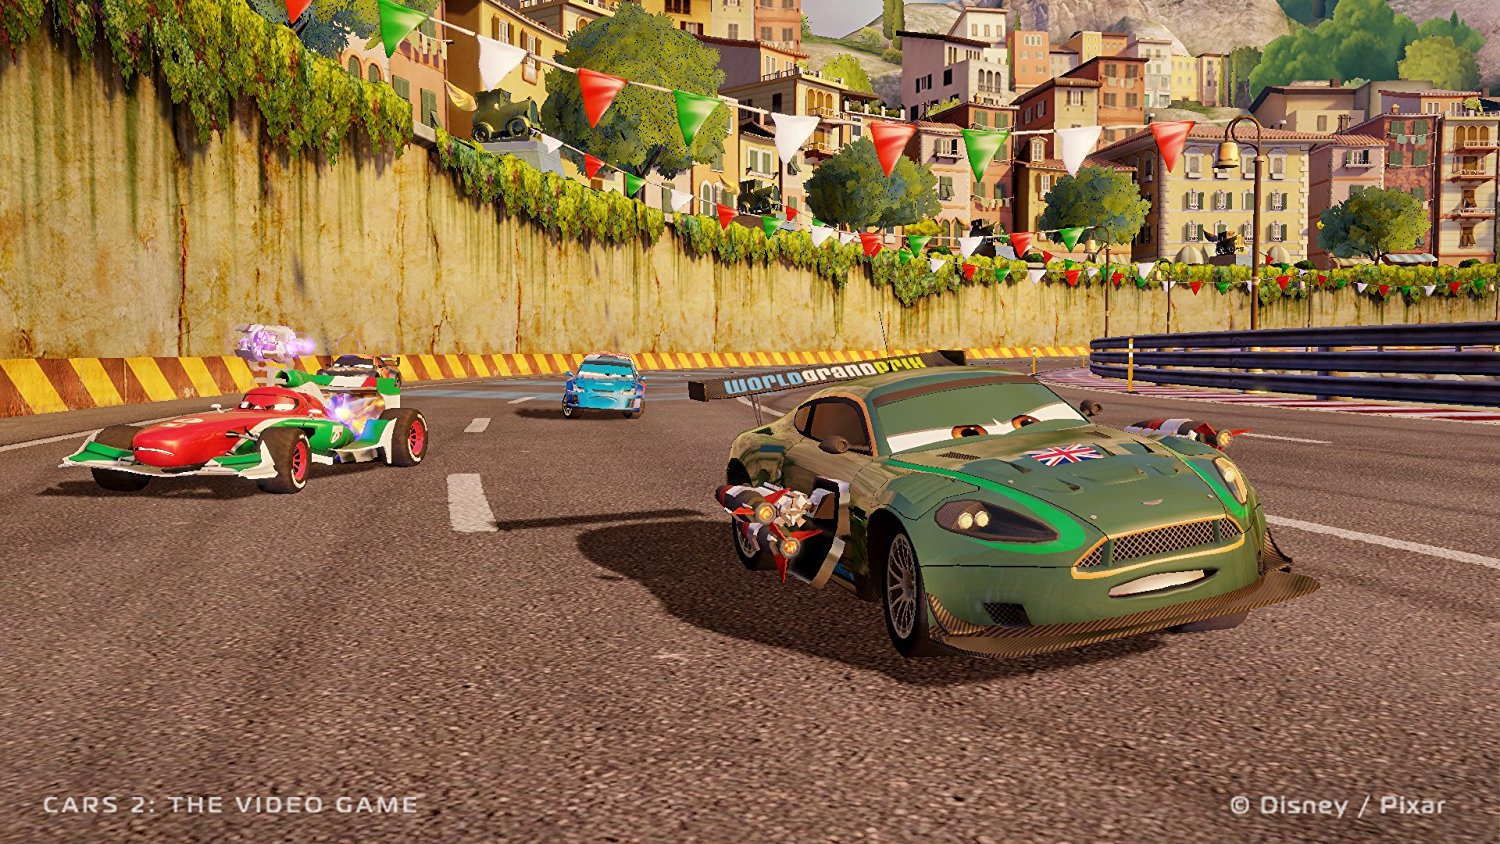 Shackle underground Intermediate Played! Cars 2: The Video Game